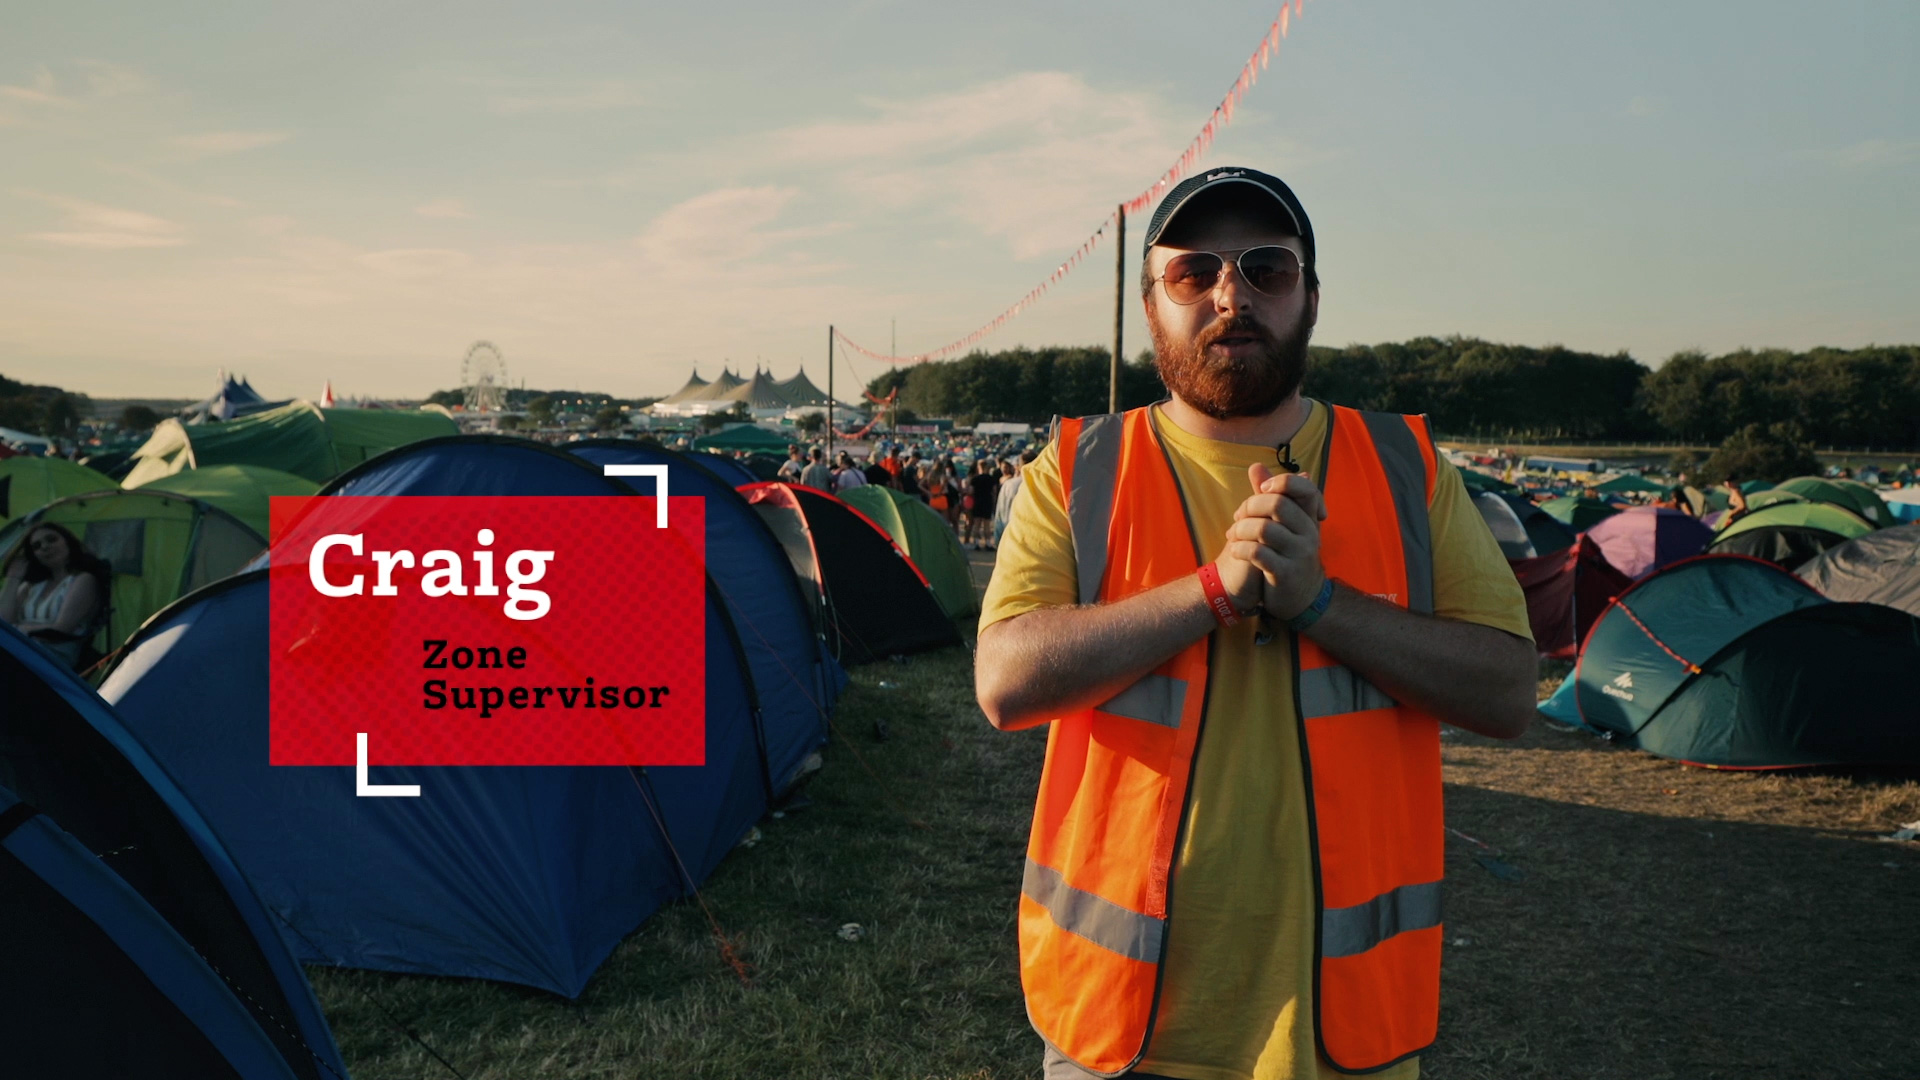 Craig a Campsite Supervisor working with Hotbox Events at Leeds Festival!